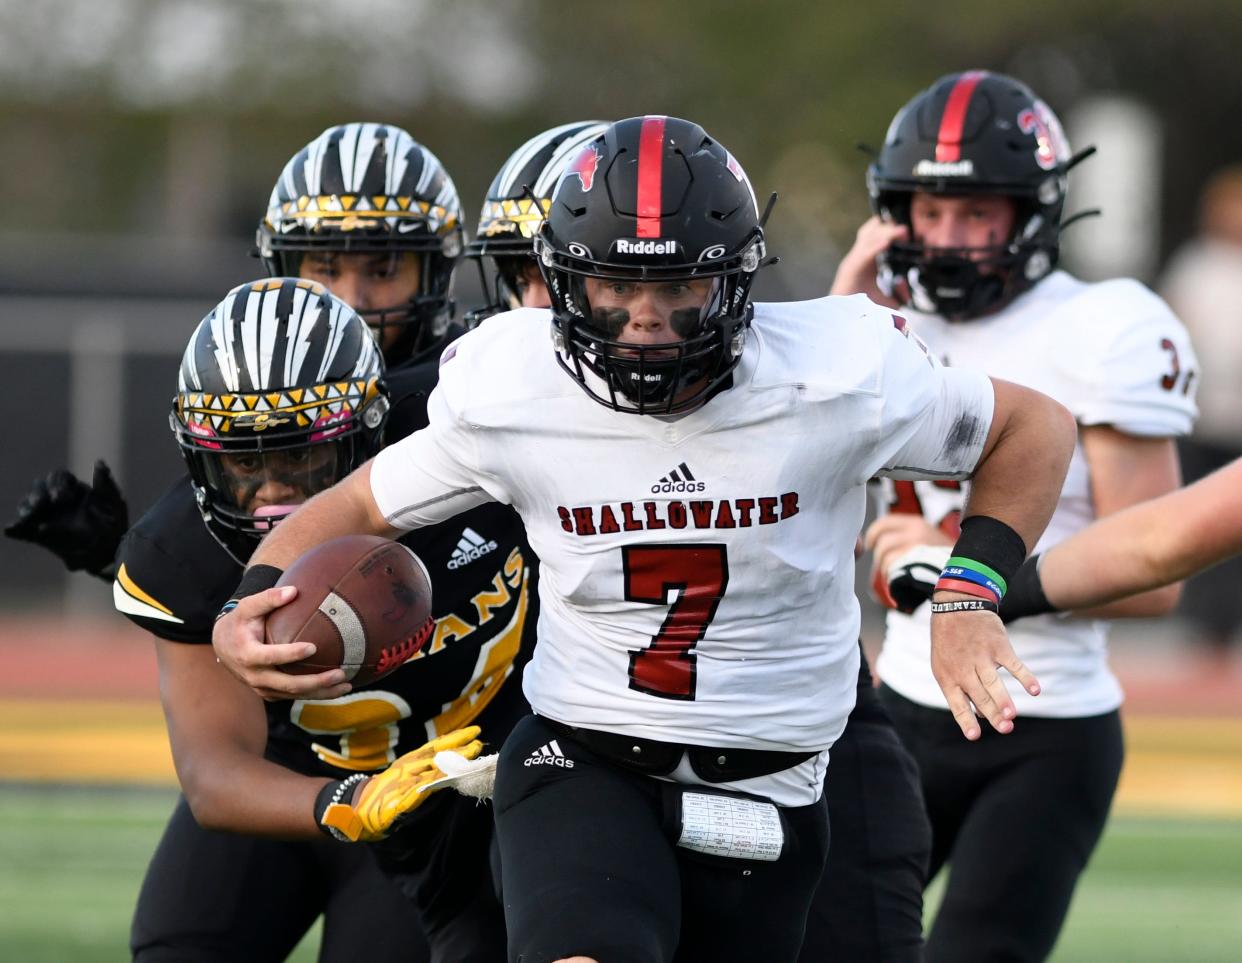 Shallowater's Brooks Carter runs with the ball against Seminole, Friday, Sept. 2, 2022, at Wigwam Stadium in Seminole. Shallowater won, 40-27.